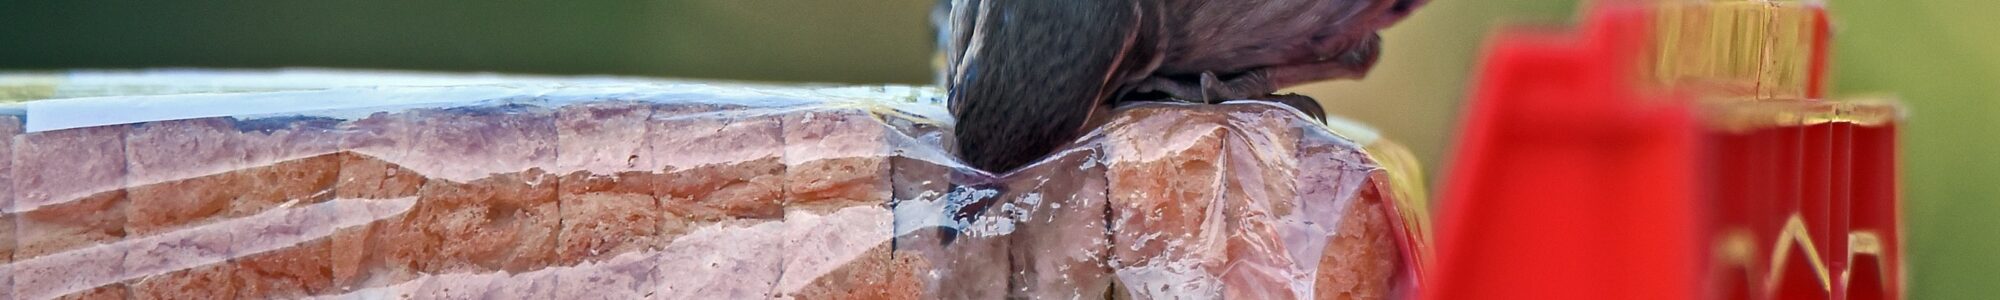 bird trying to get bread out of a plastic bag